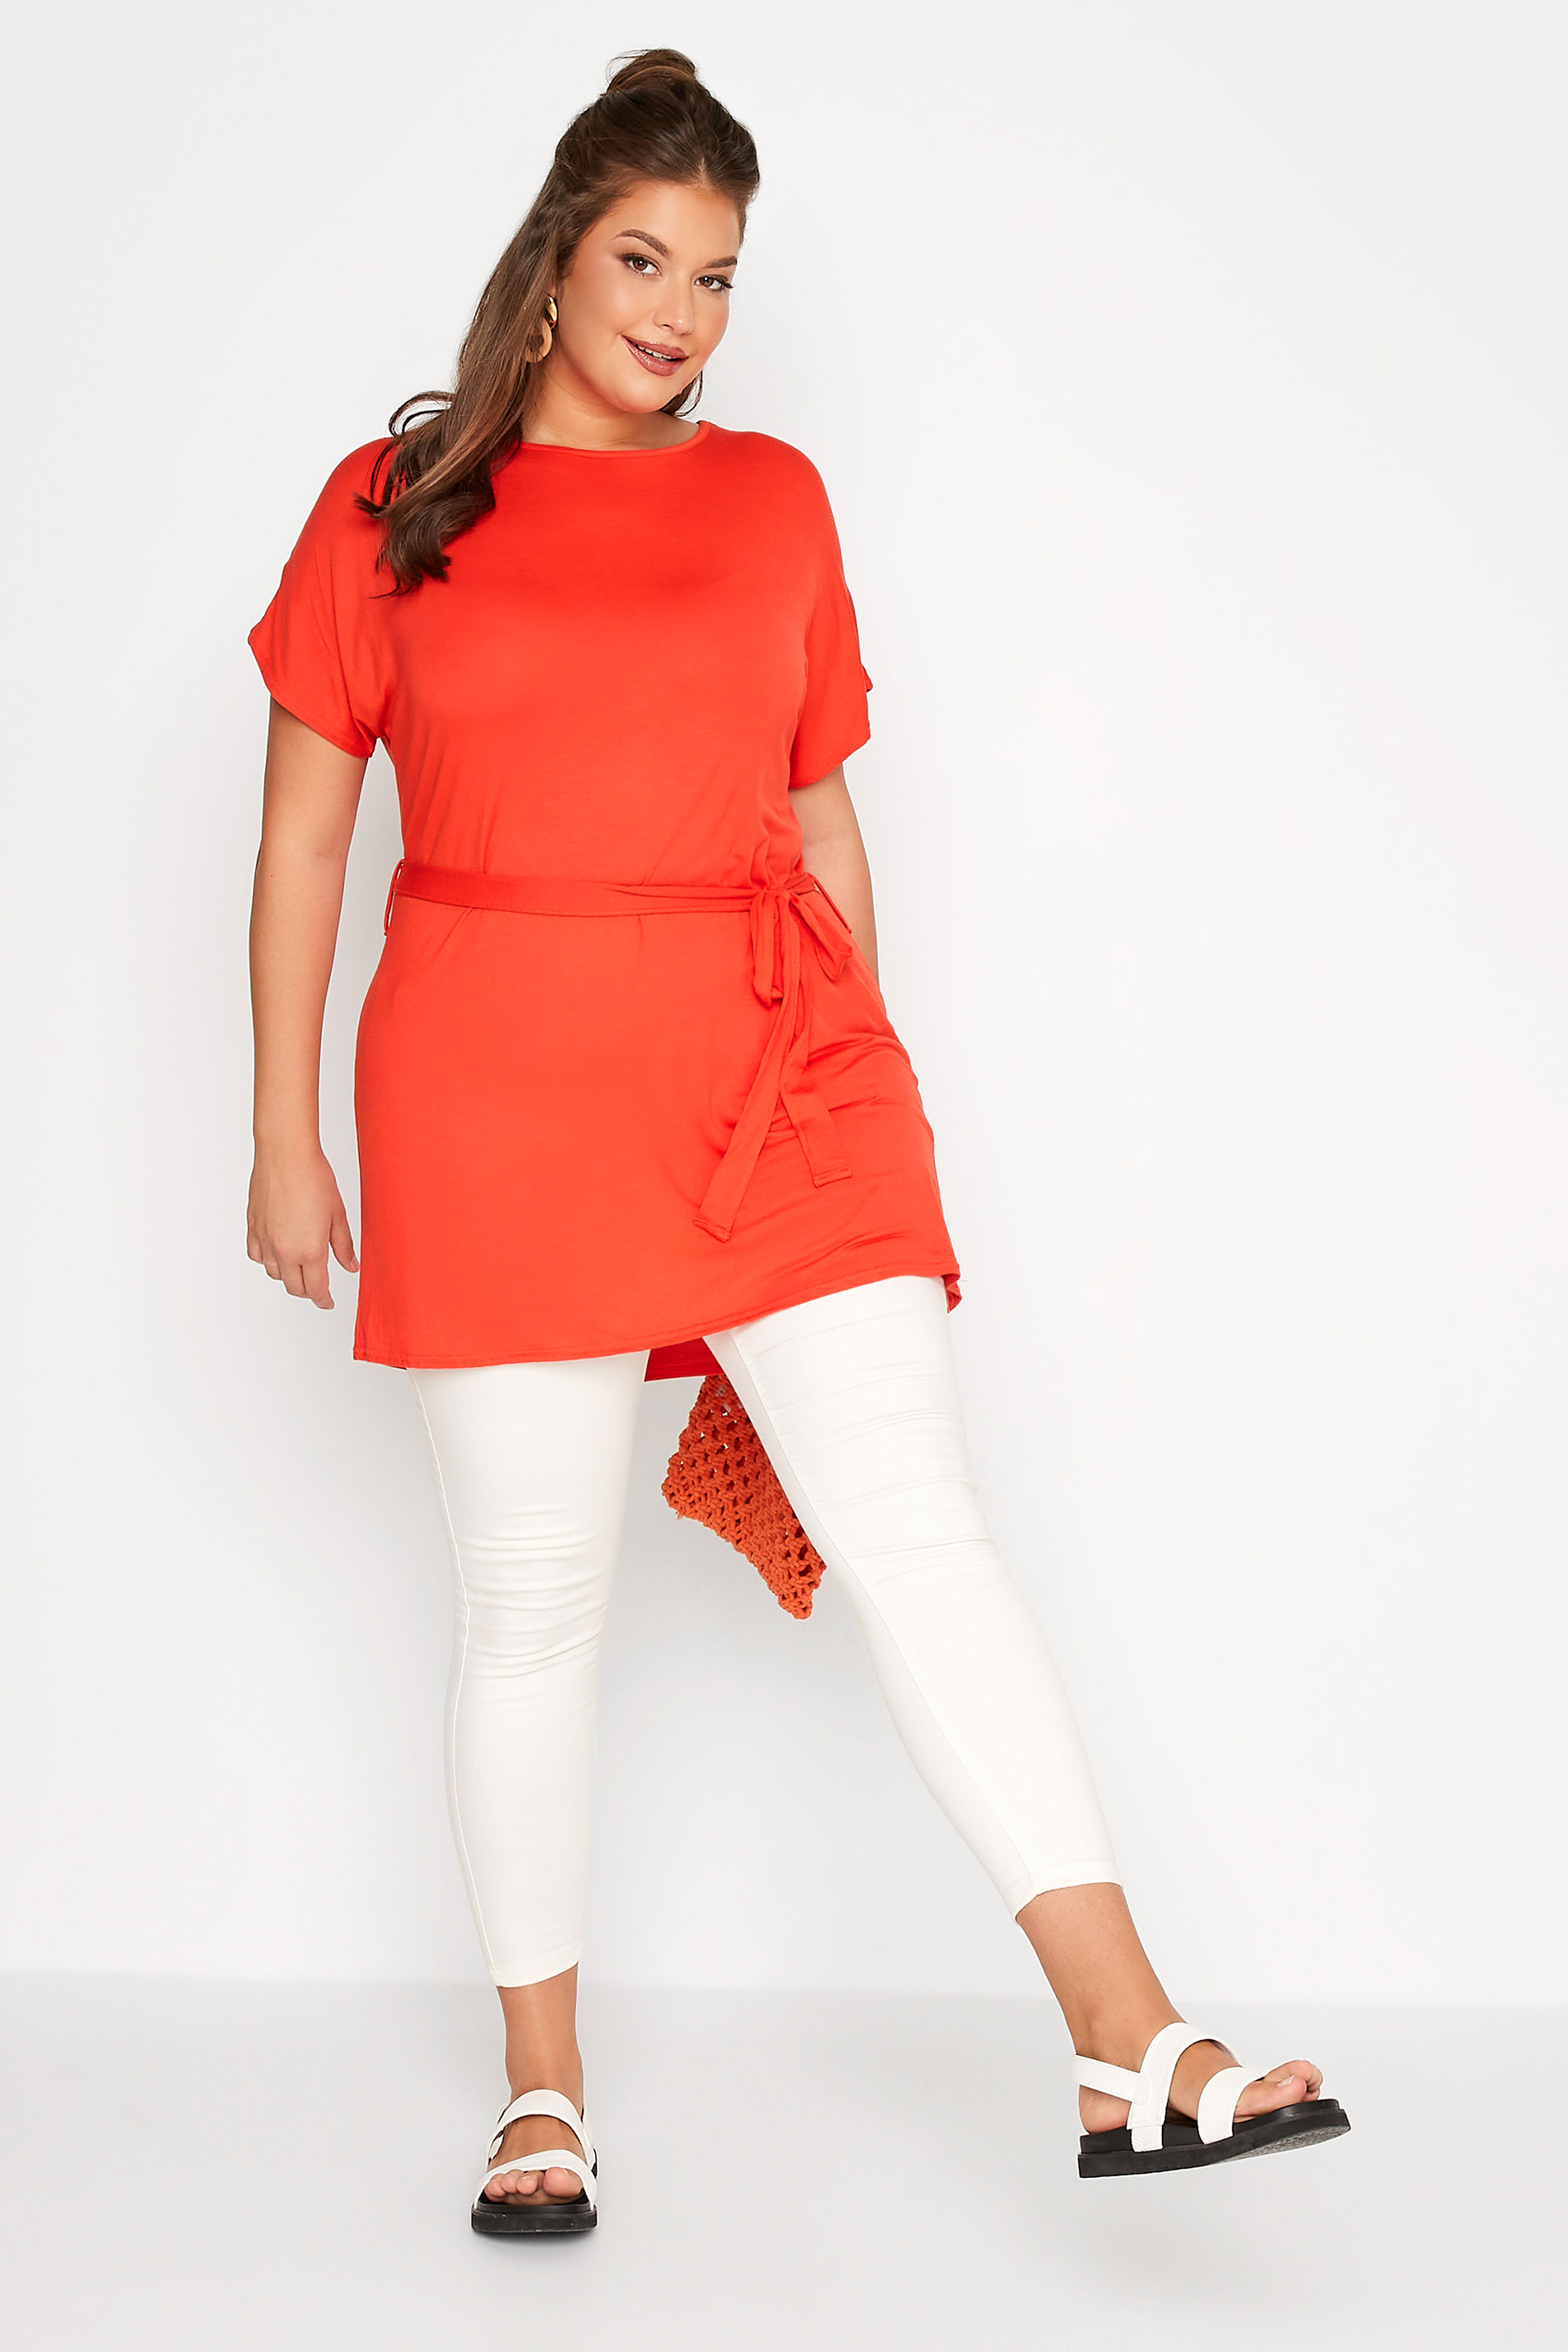 Grande taille  Tops Grande taille  Tops Casual | LIMITED COLLECTION Curve Orange Waist Tie Top - UJ15139